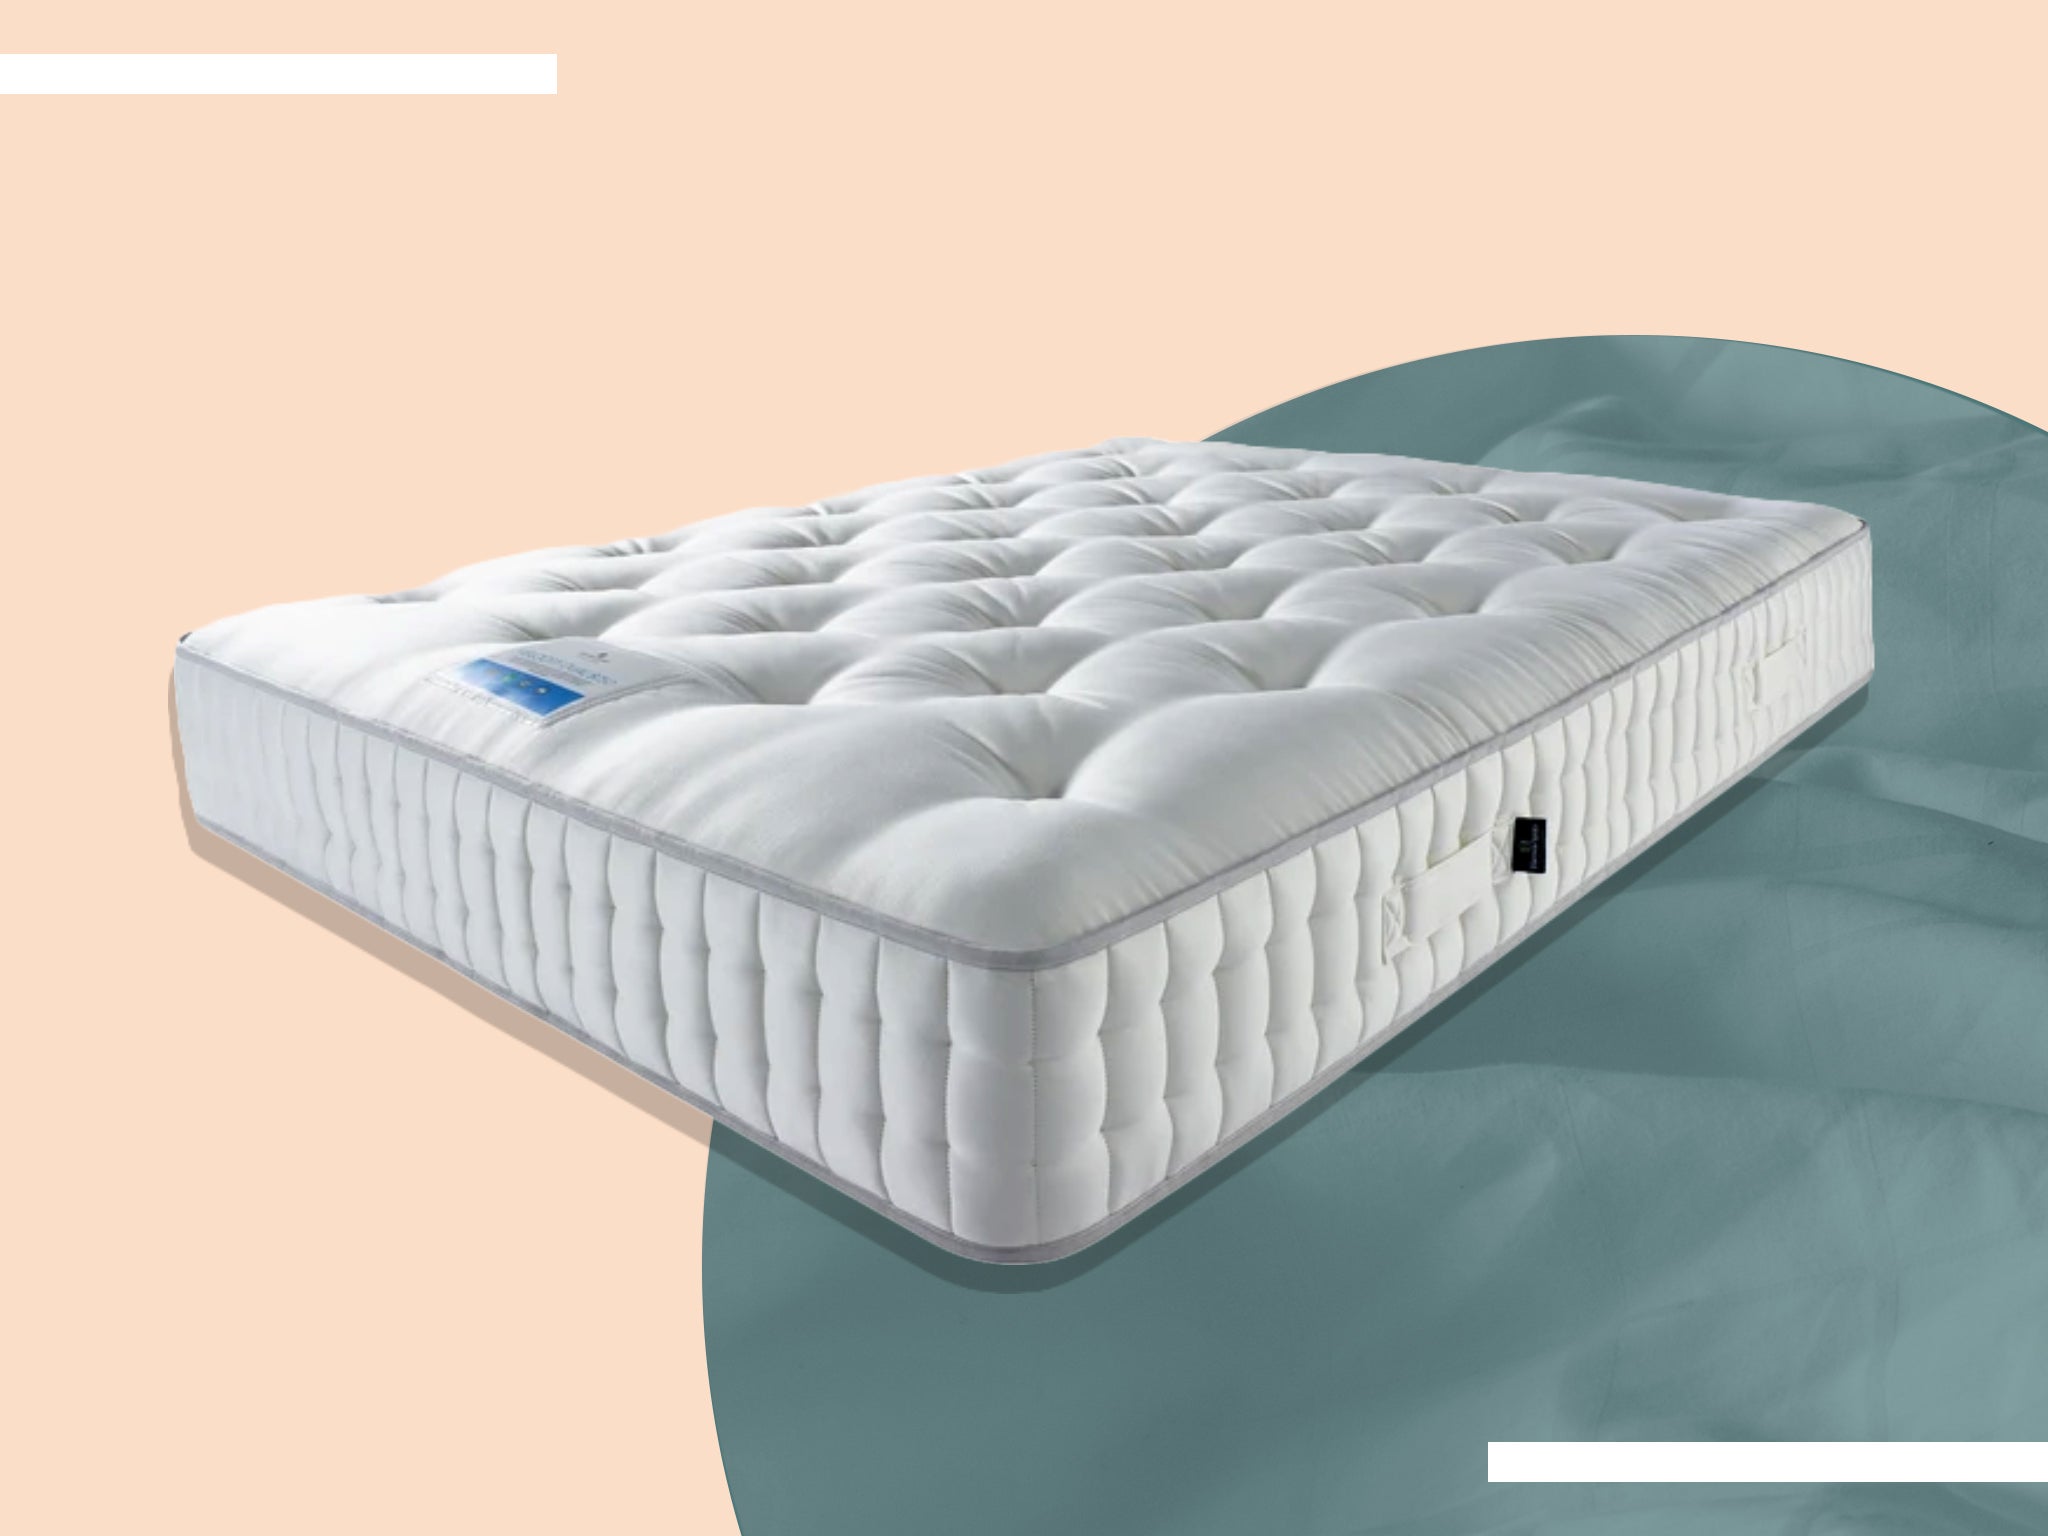 This spring mattress wants to lure you back from the land of memory foam